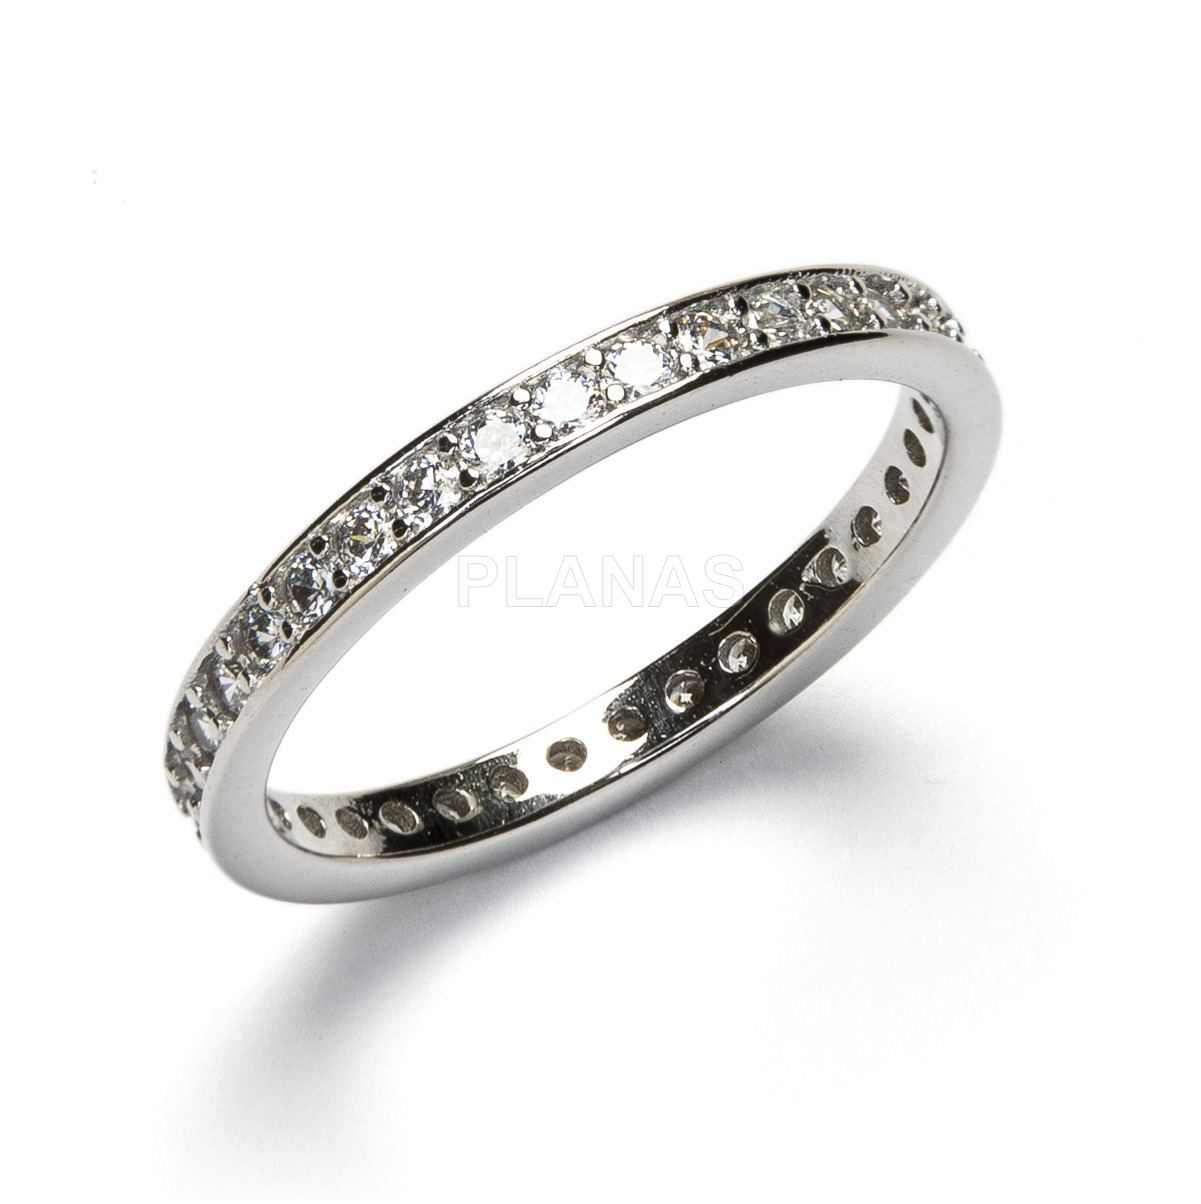 Baguette ring in rhodium plated sterling silver and white zircons.